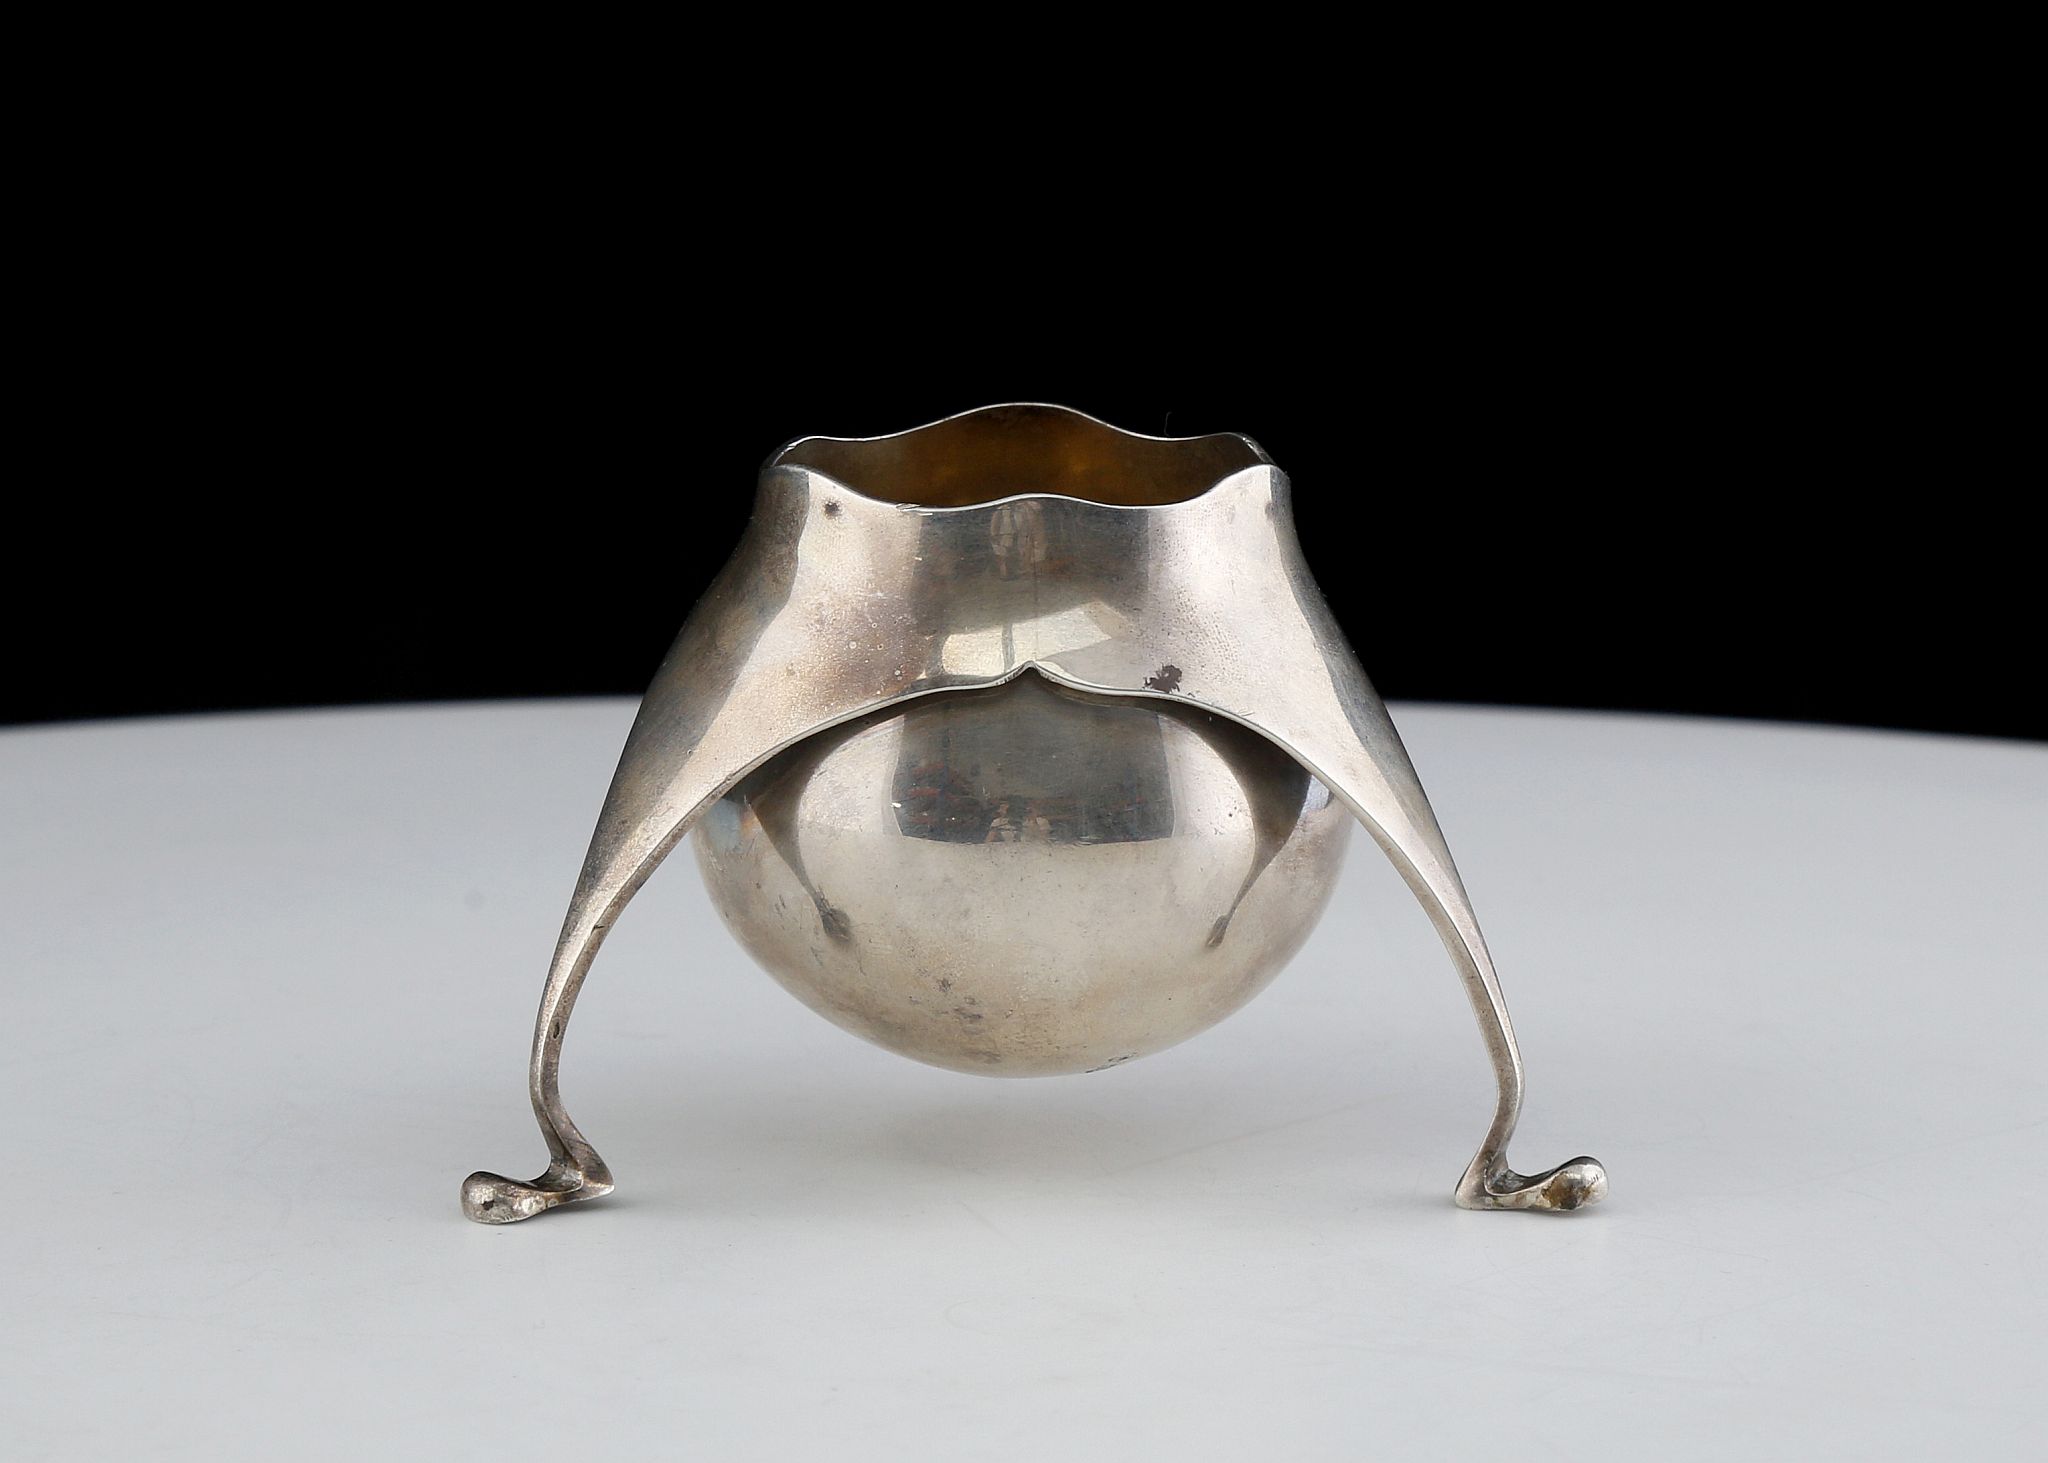 Rare Arts & Crafts Sterling Silver bud vase / dish from the Cymric collection, by Liberty & Co,